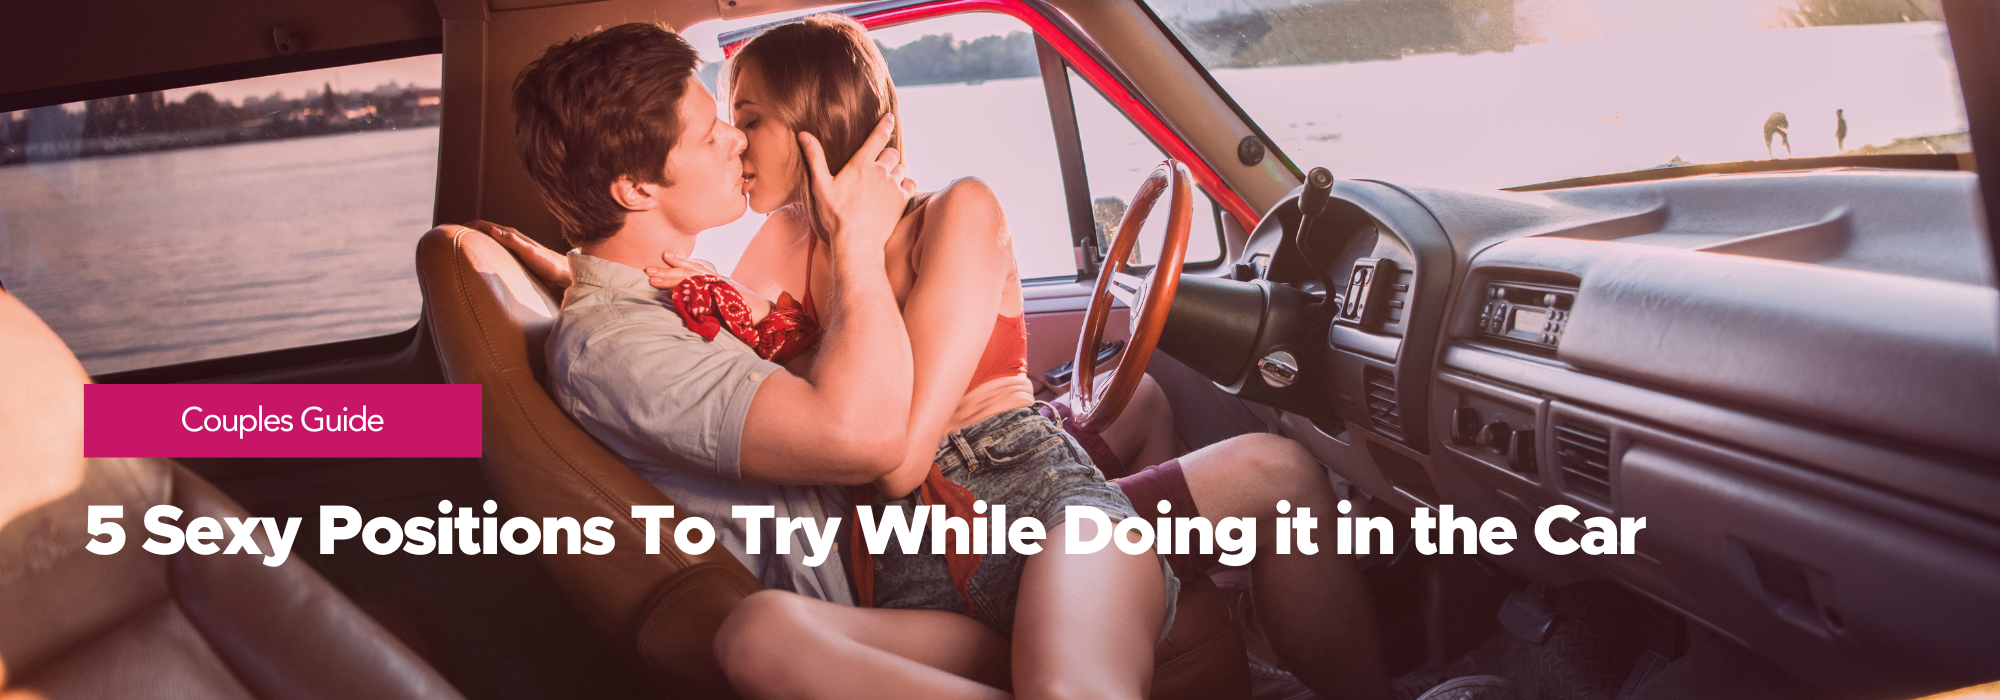 See our 5 recommended sex positions for doing it in the car - read more below!